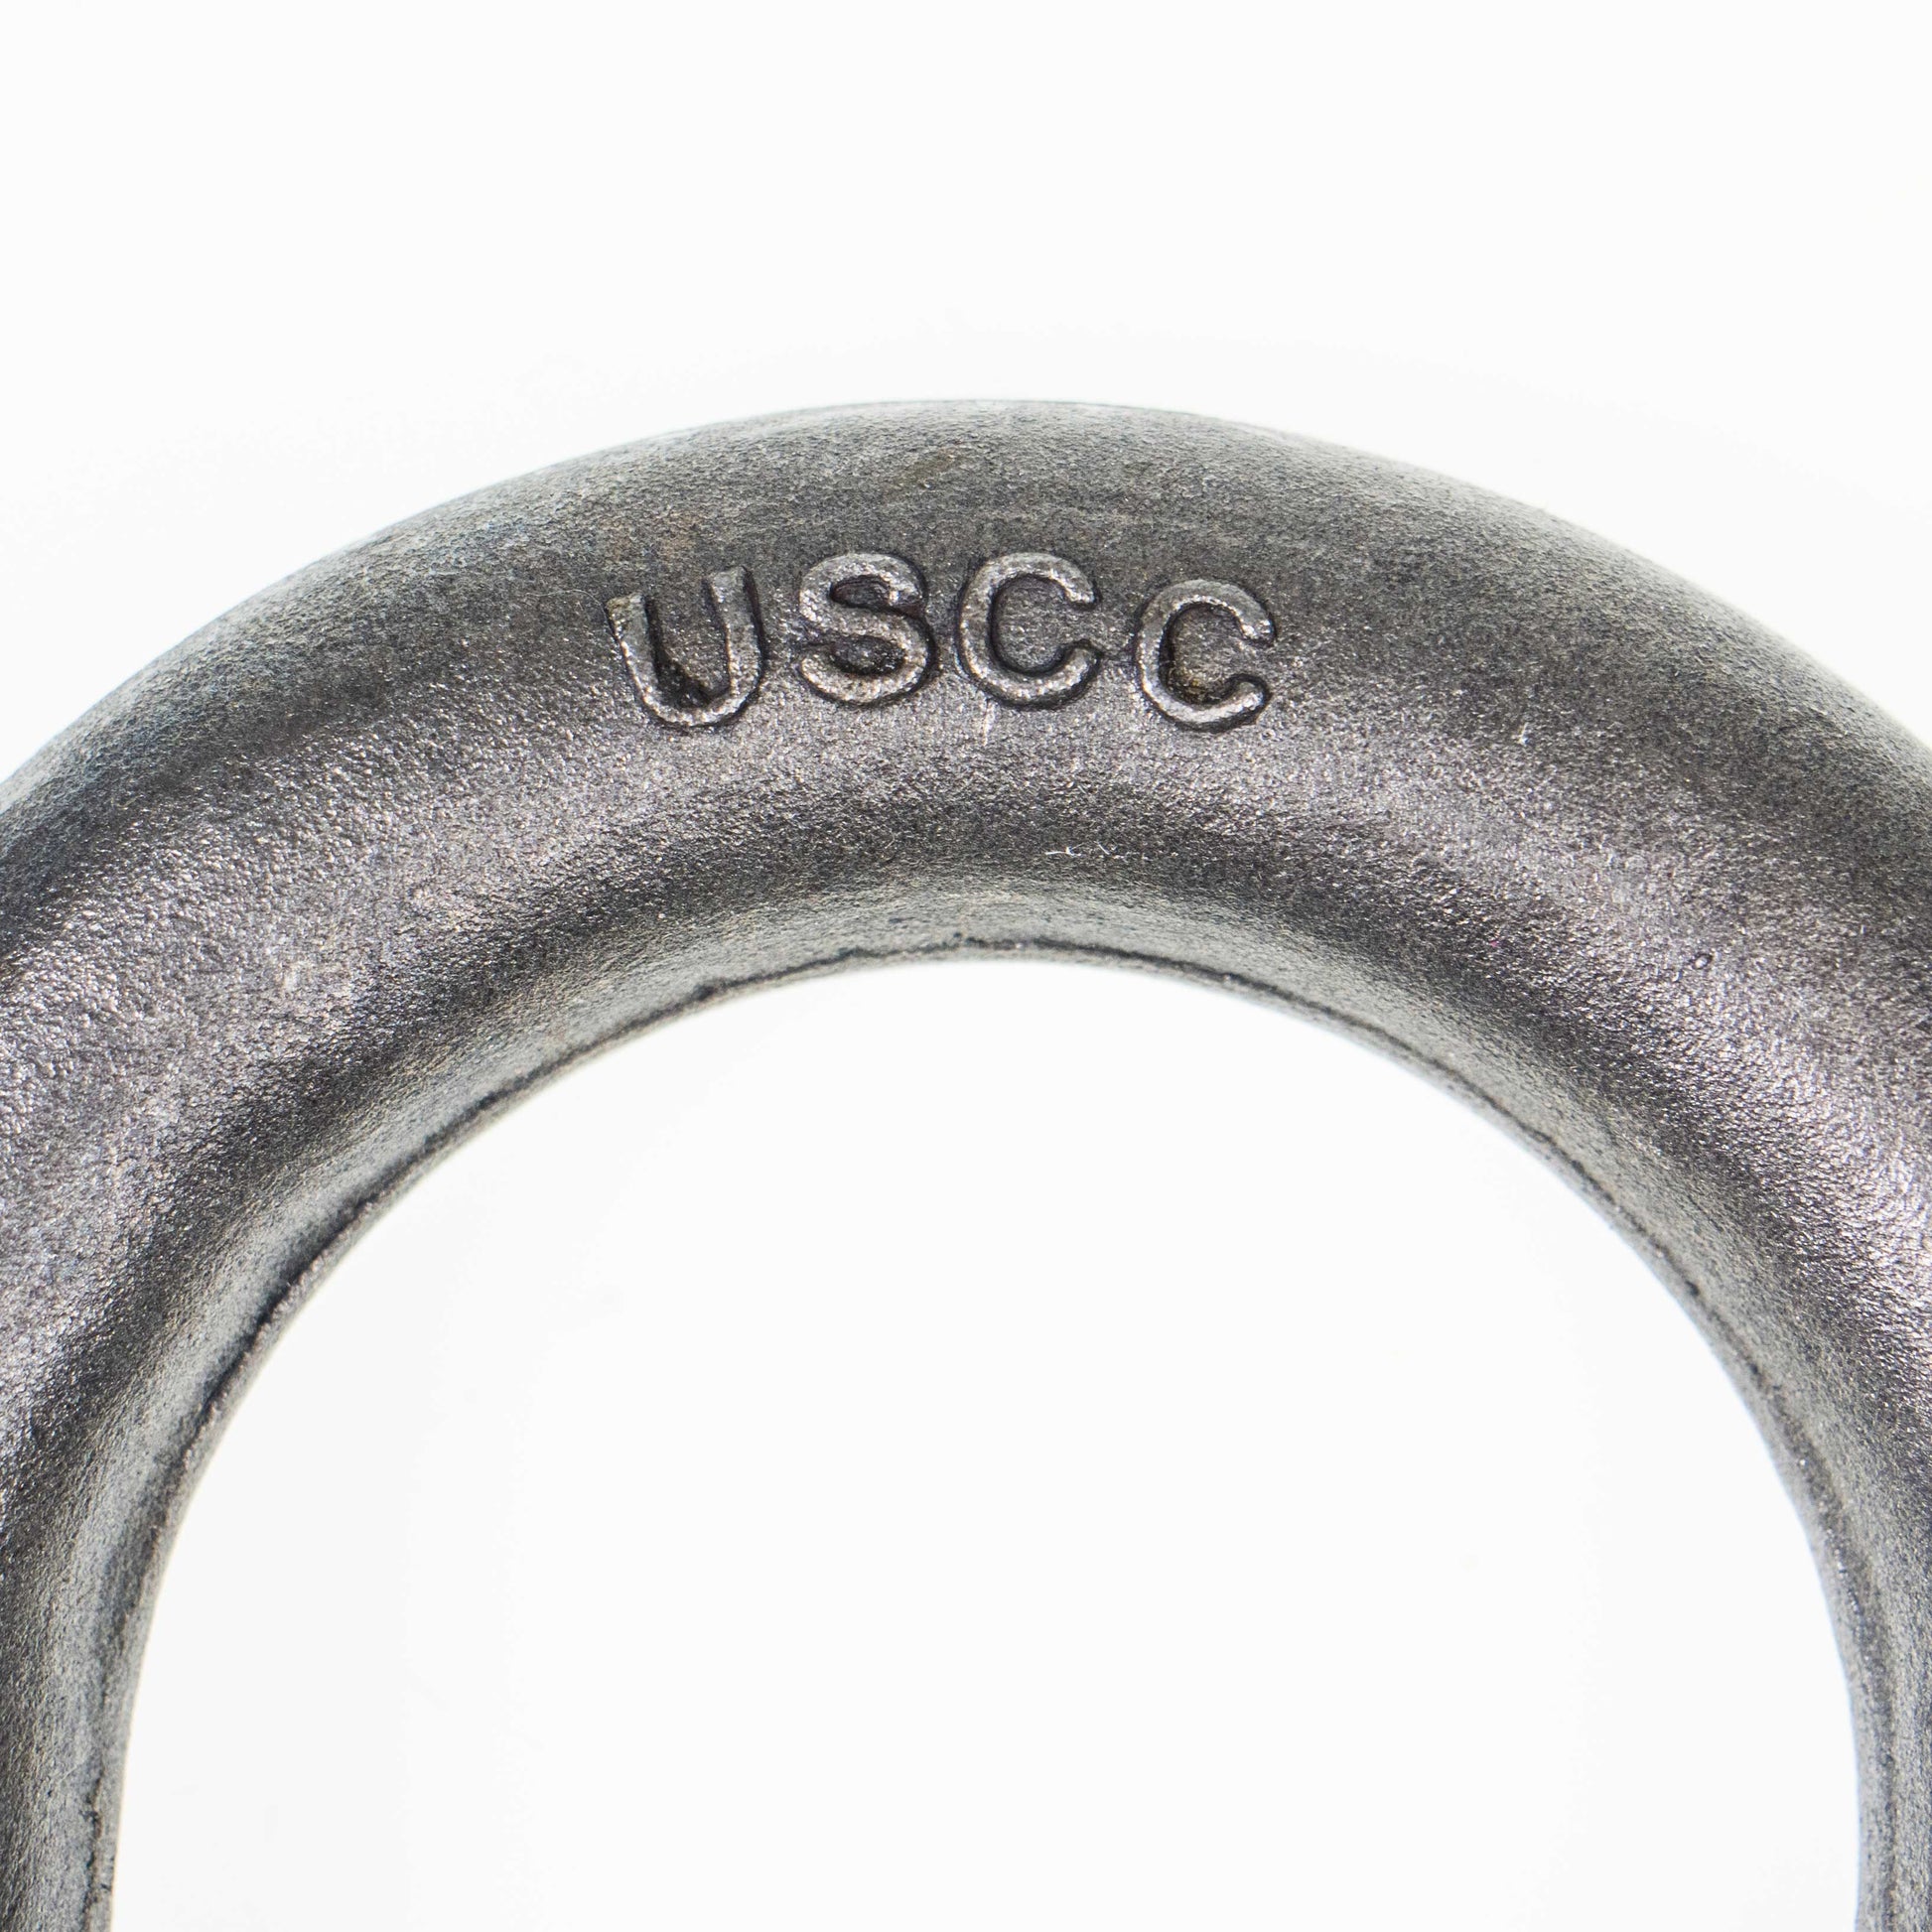 1 inch Lashing Forged Mounting Ring 47000 lbs D RING ONLY image 4 of 5